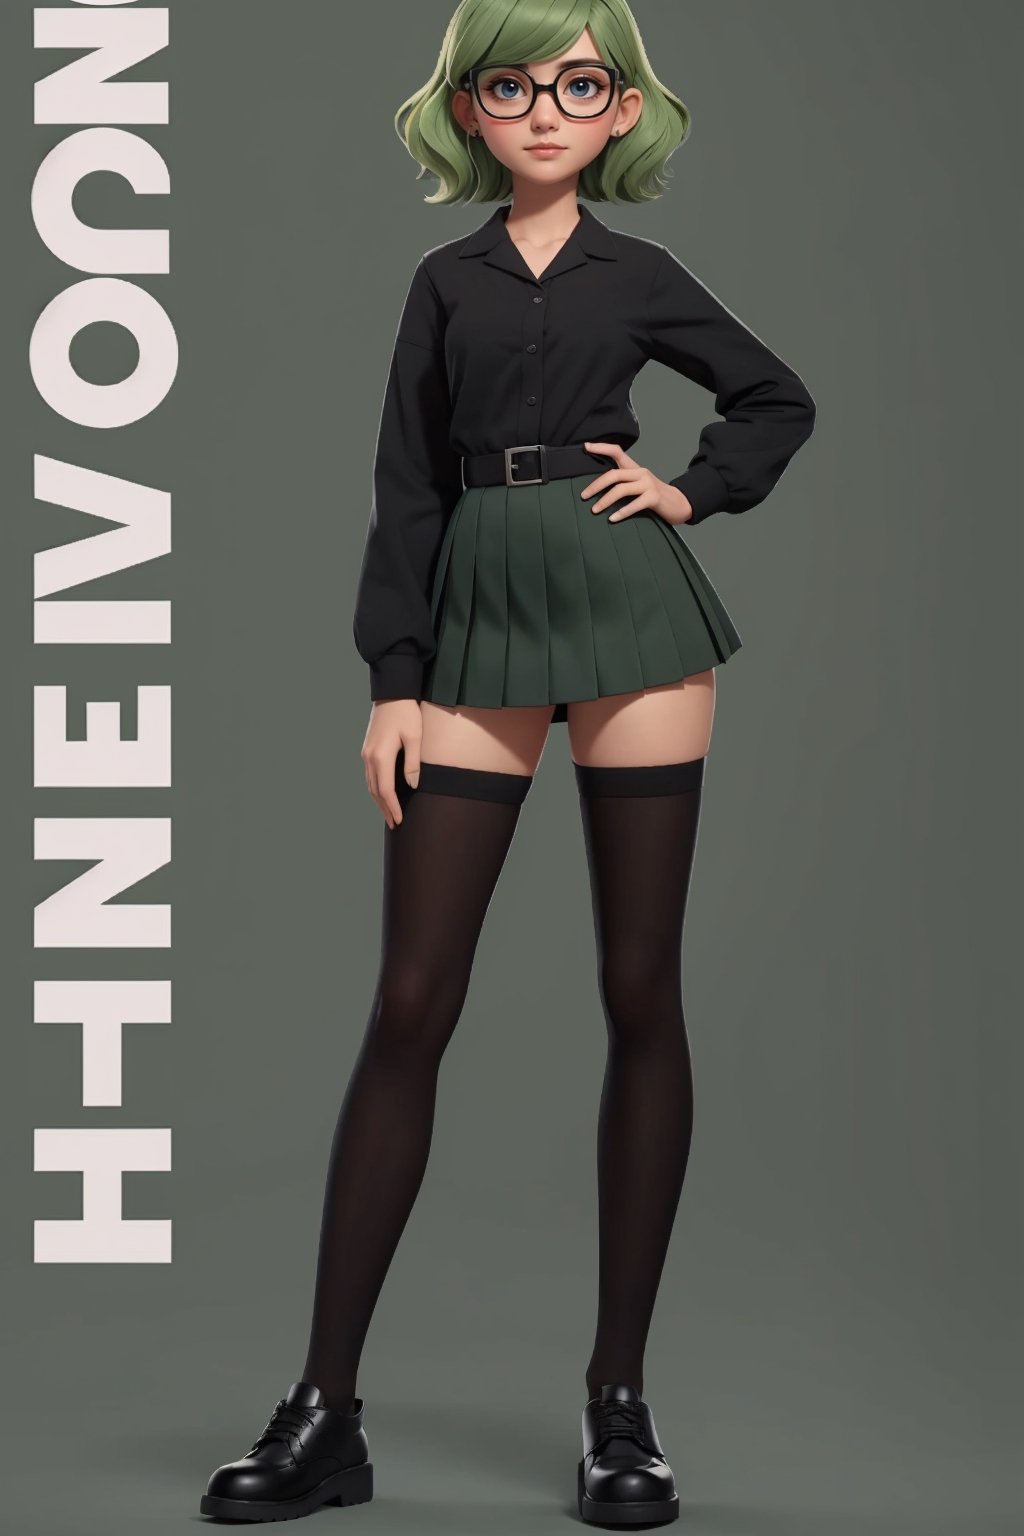 character sheet, beautiful, good hands, full body, good body, 18 year old girl body, sexy pose, full_body,character_sheet, looking to the camera, Short wavy green hair, with black round glasses, ecolar clothes, black school shoes, school Stockings,magazine cover